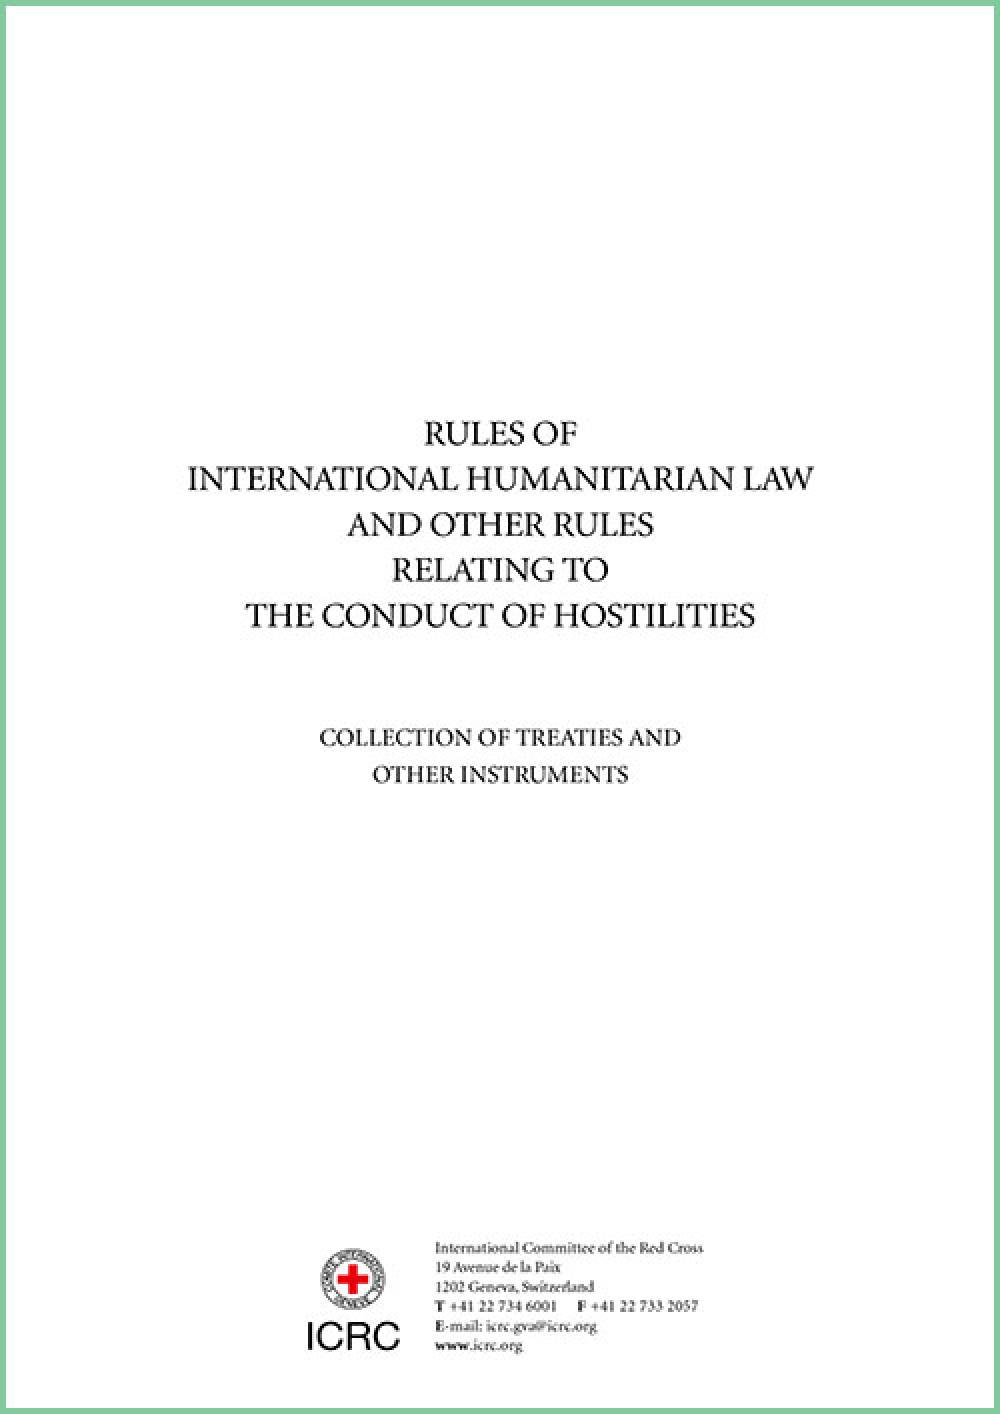 Rules of International Humanitarian Law and Other Rules Relating to the Conduct of Hostilities